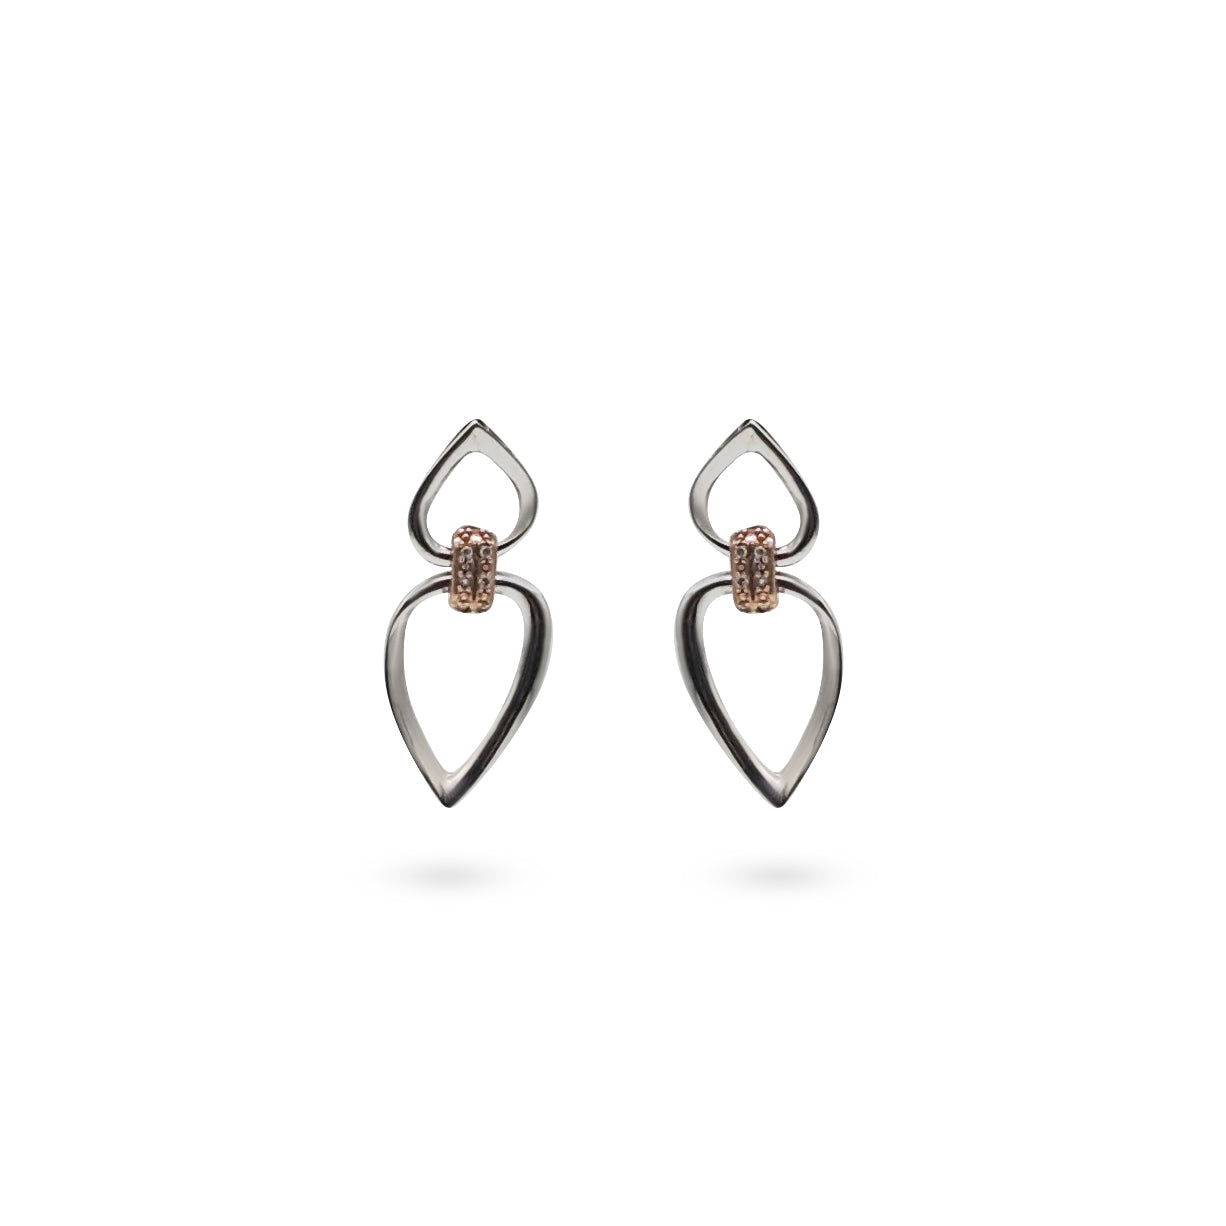 10K - Two-Tone Gold Leaf Shaped Drop Earrings with Round Diamonds - TDW 0.22 CT